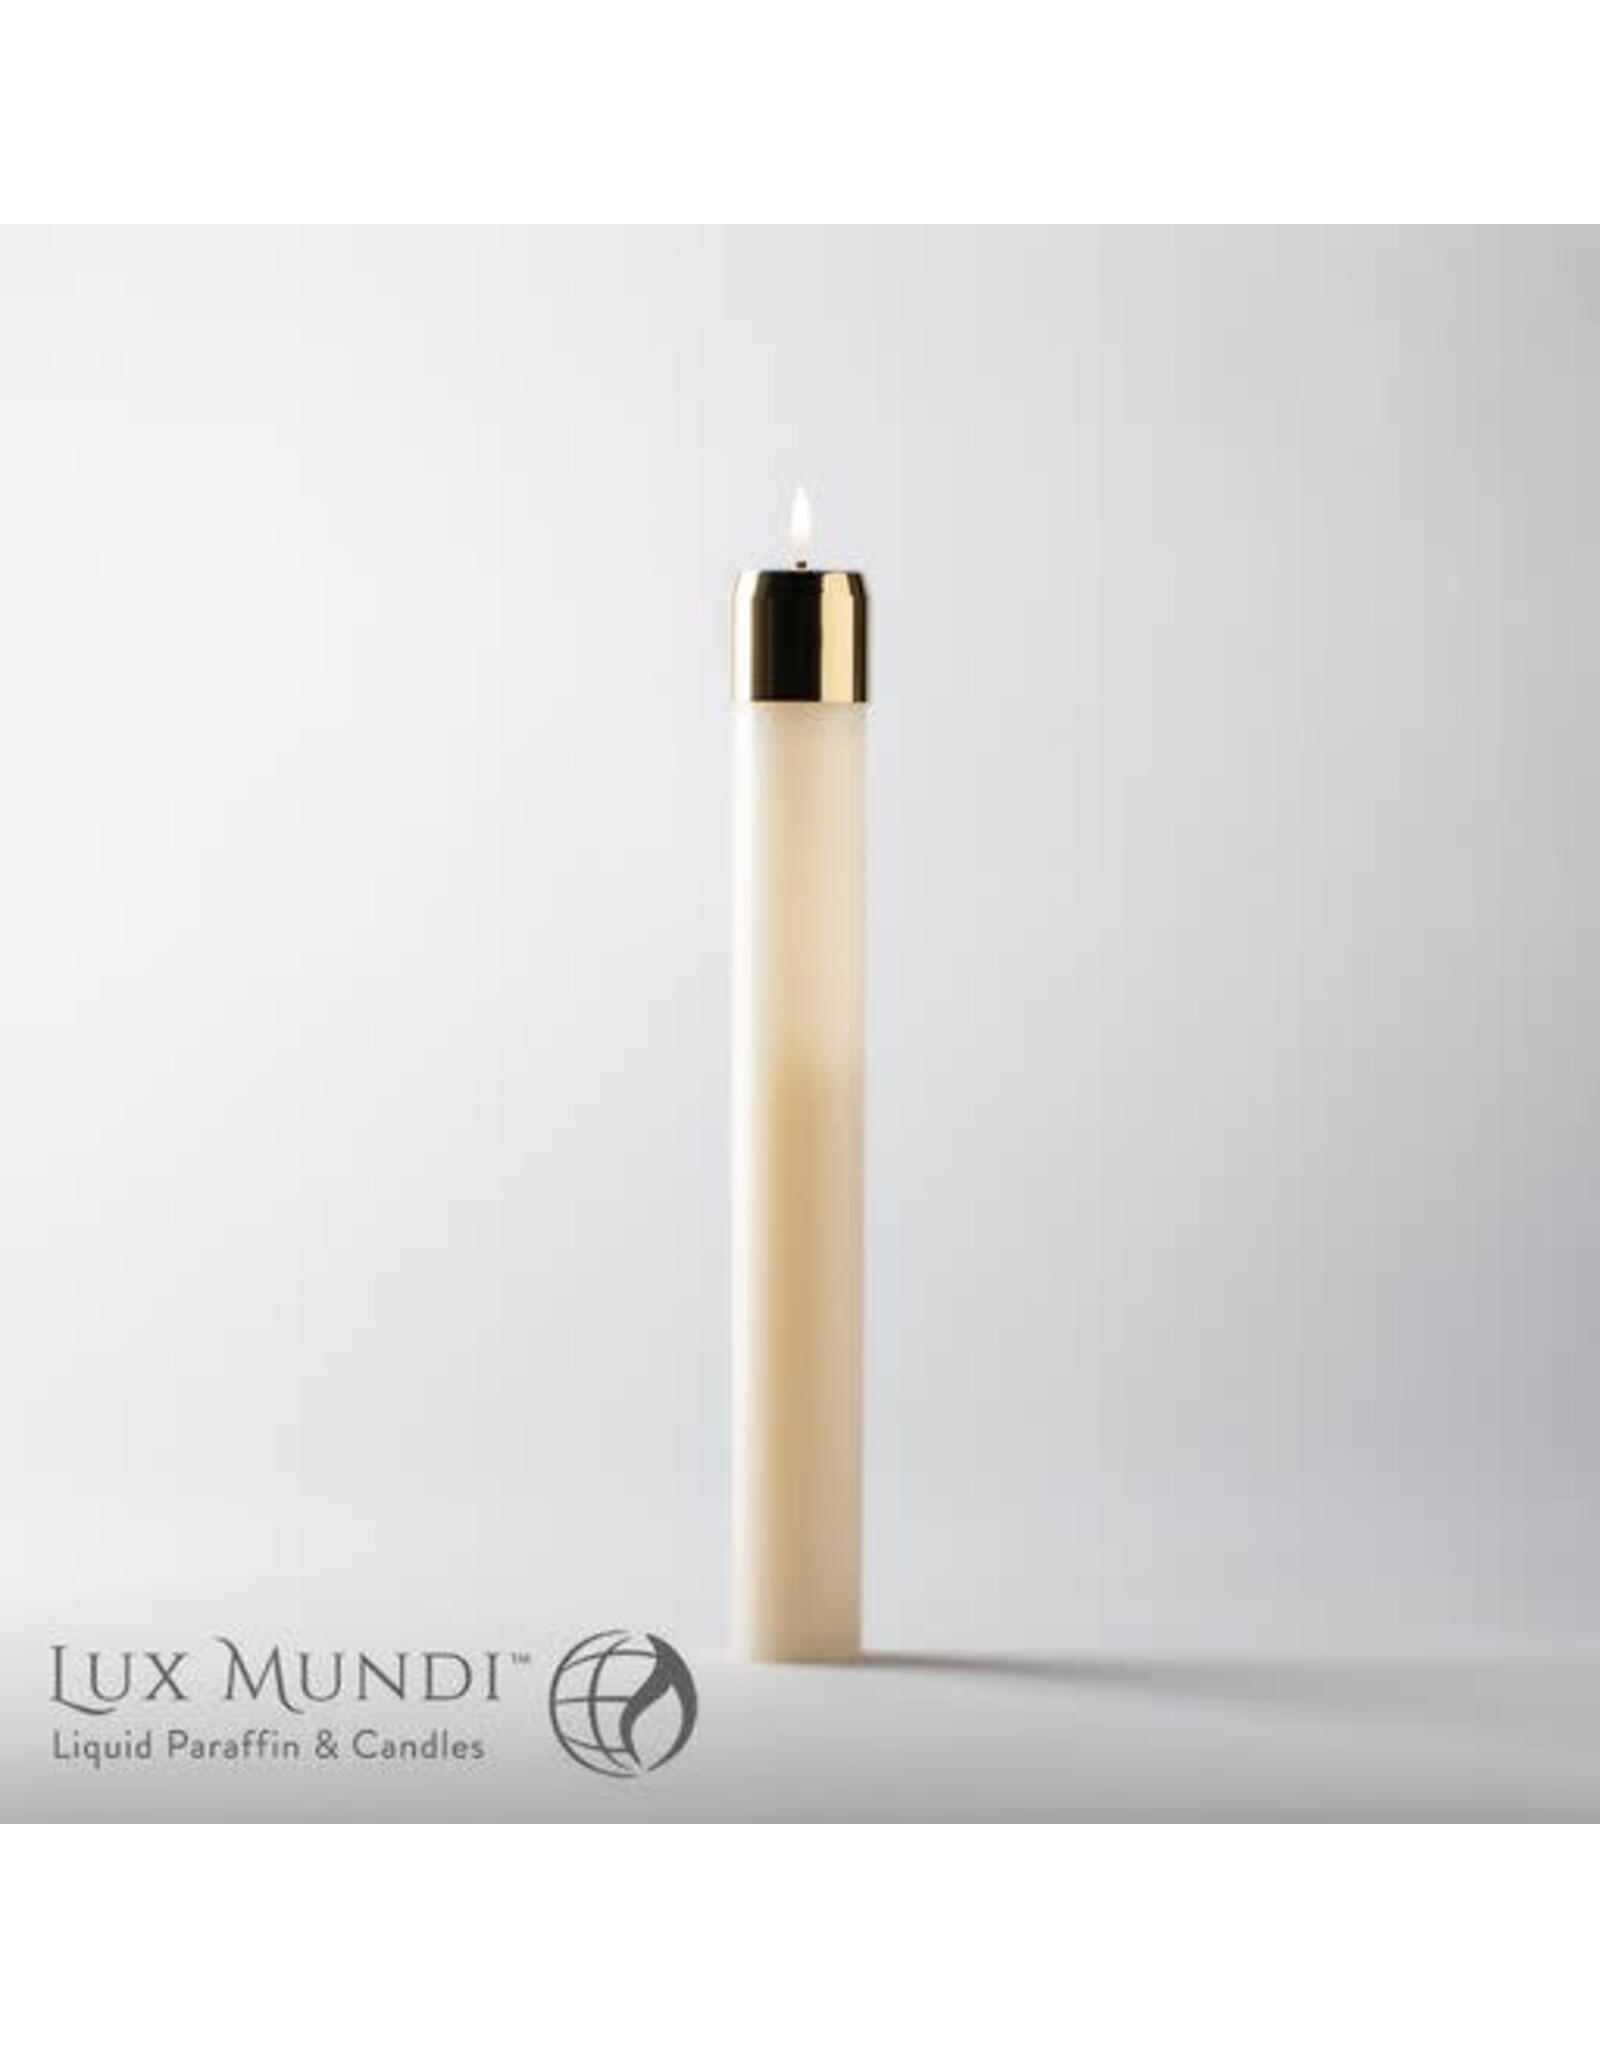 Lux Mundi Refillable Oil Altar Candle 1-15/16"x12"